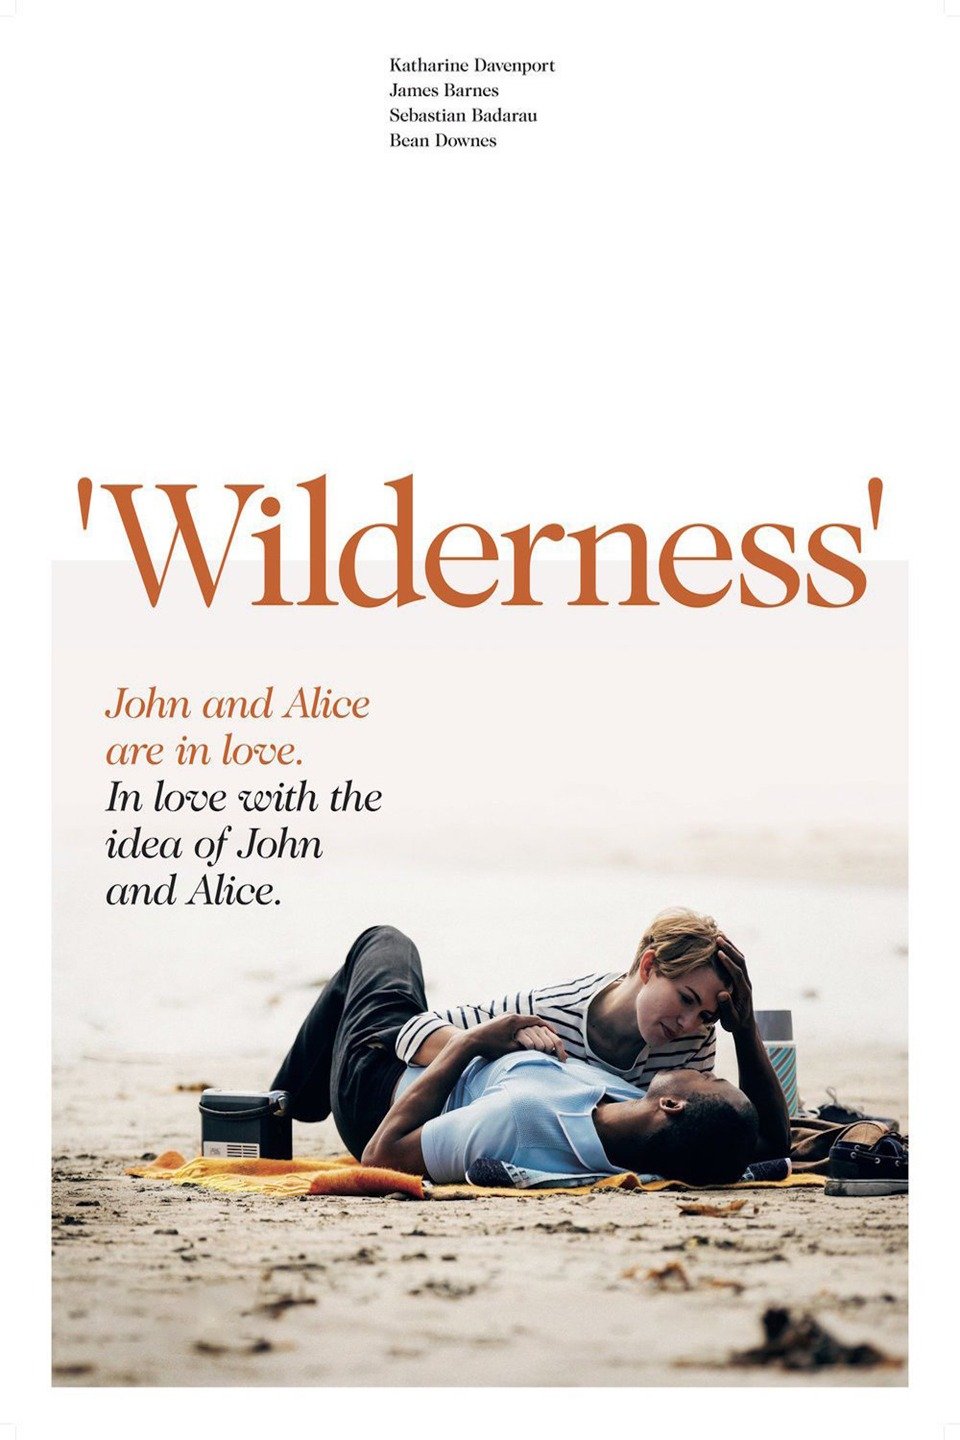 into the wilderness series movie